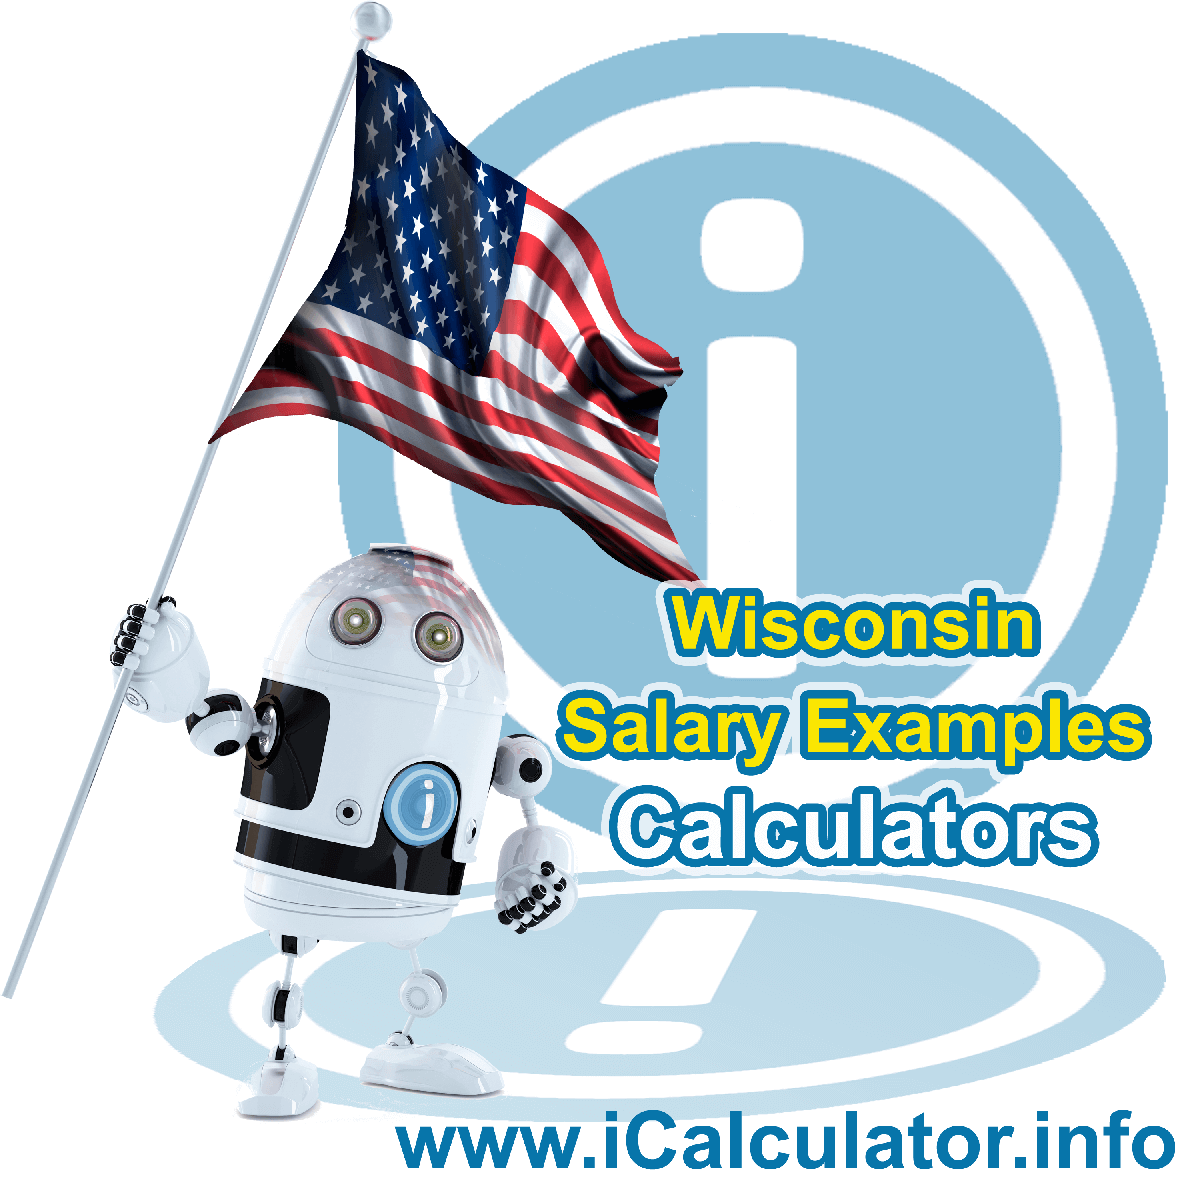 Wisconsin Salary Example for $ 180,000.00 in 2023 | iCalculator™ | $ 180,000.00 salary example for employee and employer paying Wisconsin State tincome taxes. Detailed salary after tax calculation including Wisconsin State Tax, Federal State Tax, Medicare Deductions, Social Security, Capital Gains and other income tax and salary deductions complete with supporting Wisconsin state tax tables 